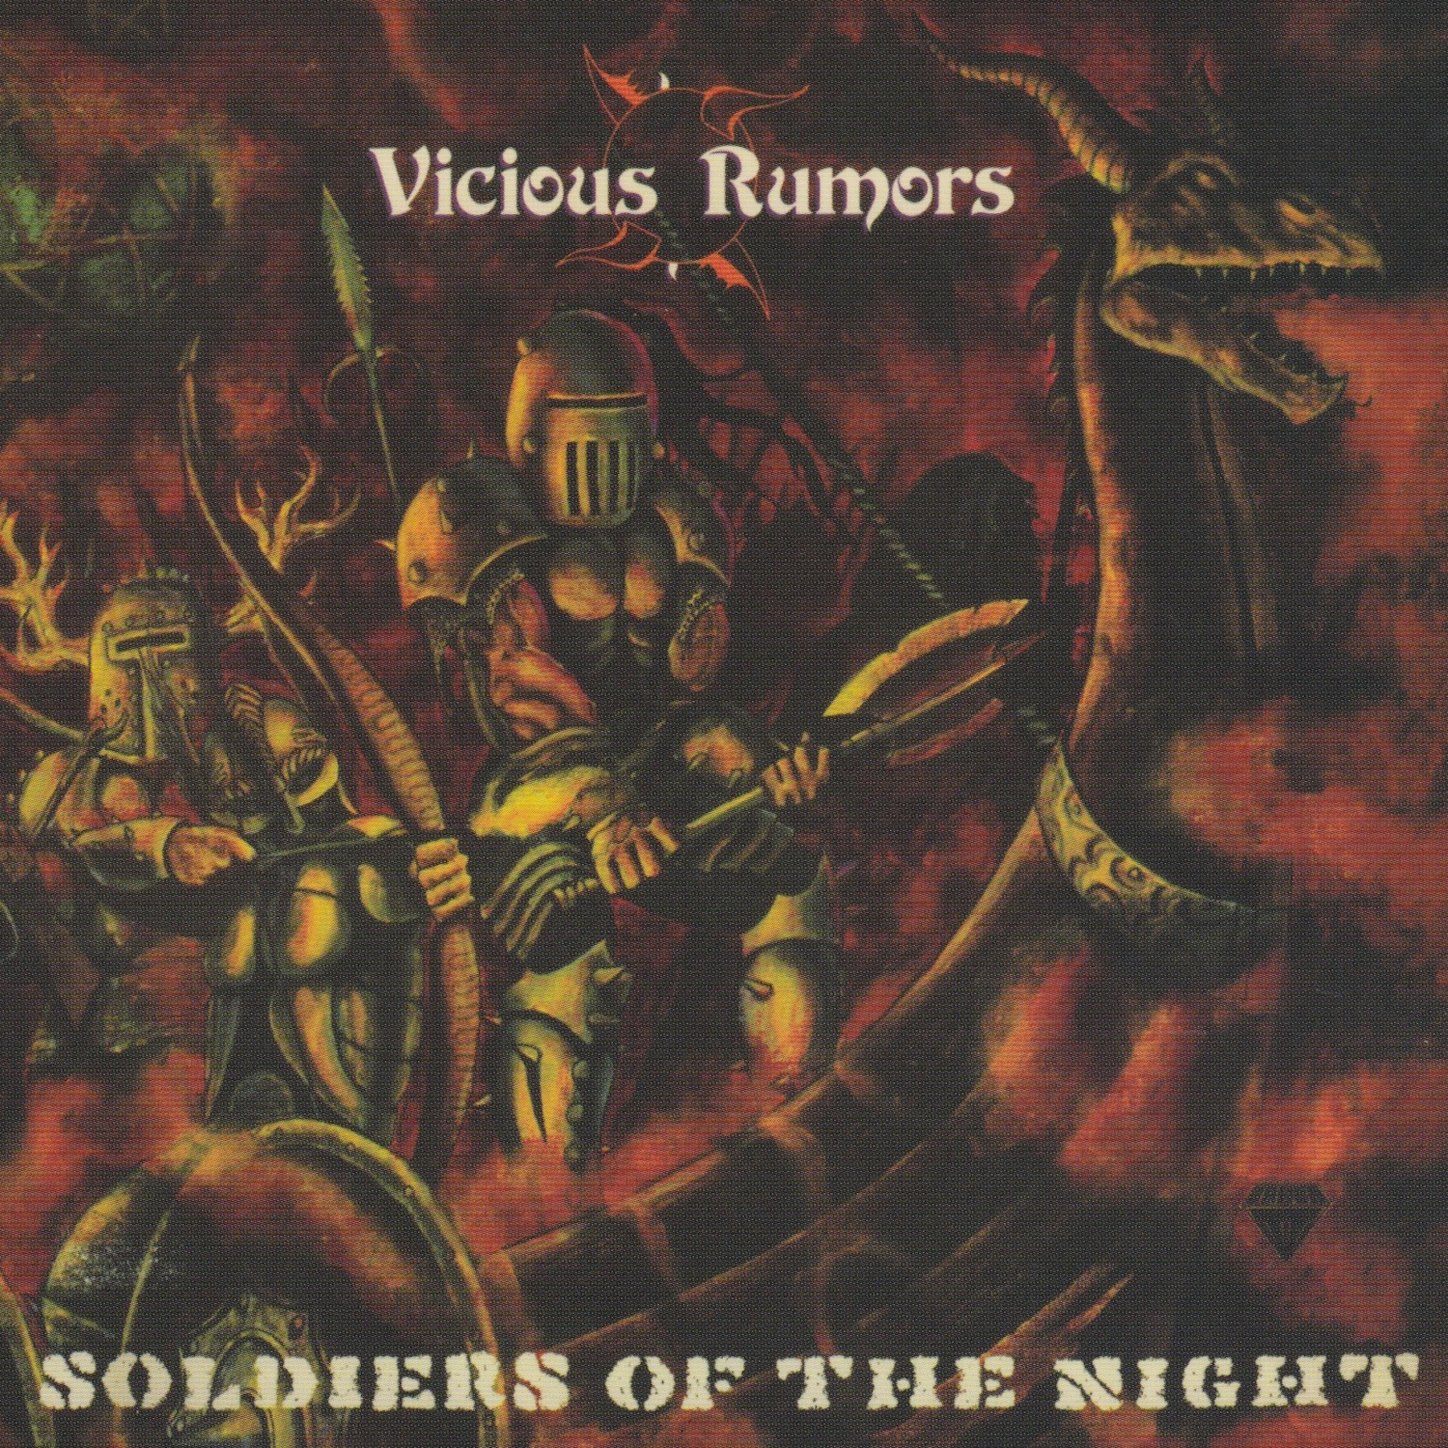 Vicious Rumors-Soldiers Of The Night-(SH 1020-2)-REMASTERED-CD-FLAC-2009-WRE